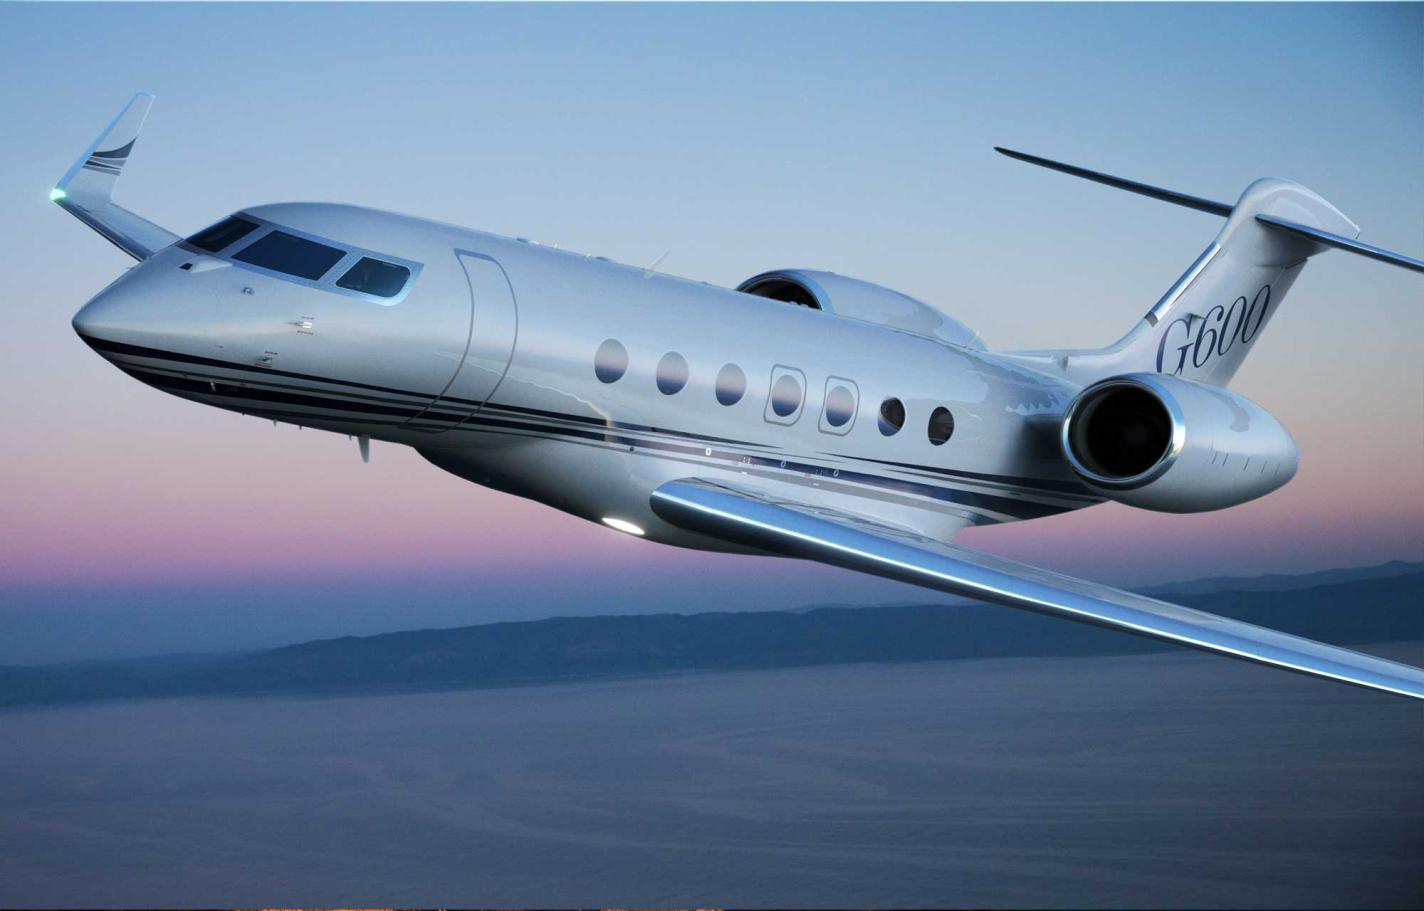 How Does the Gulfstream G650ER Compare to Other Ultra-Long-Range Business Jets?